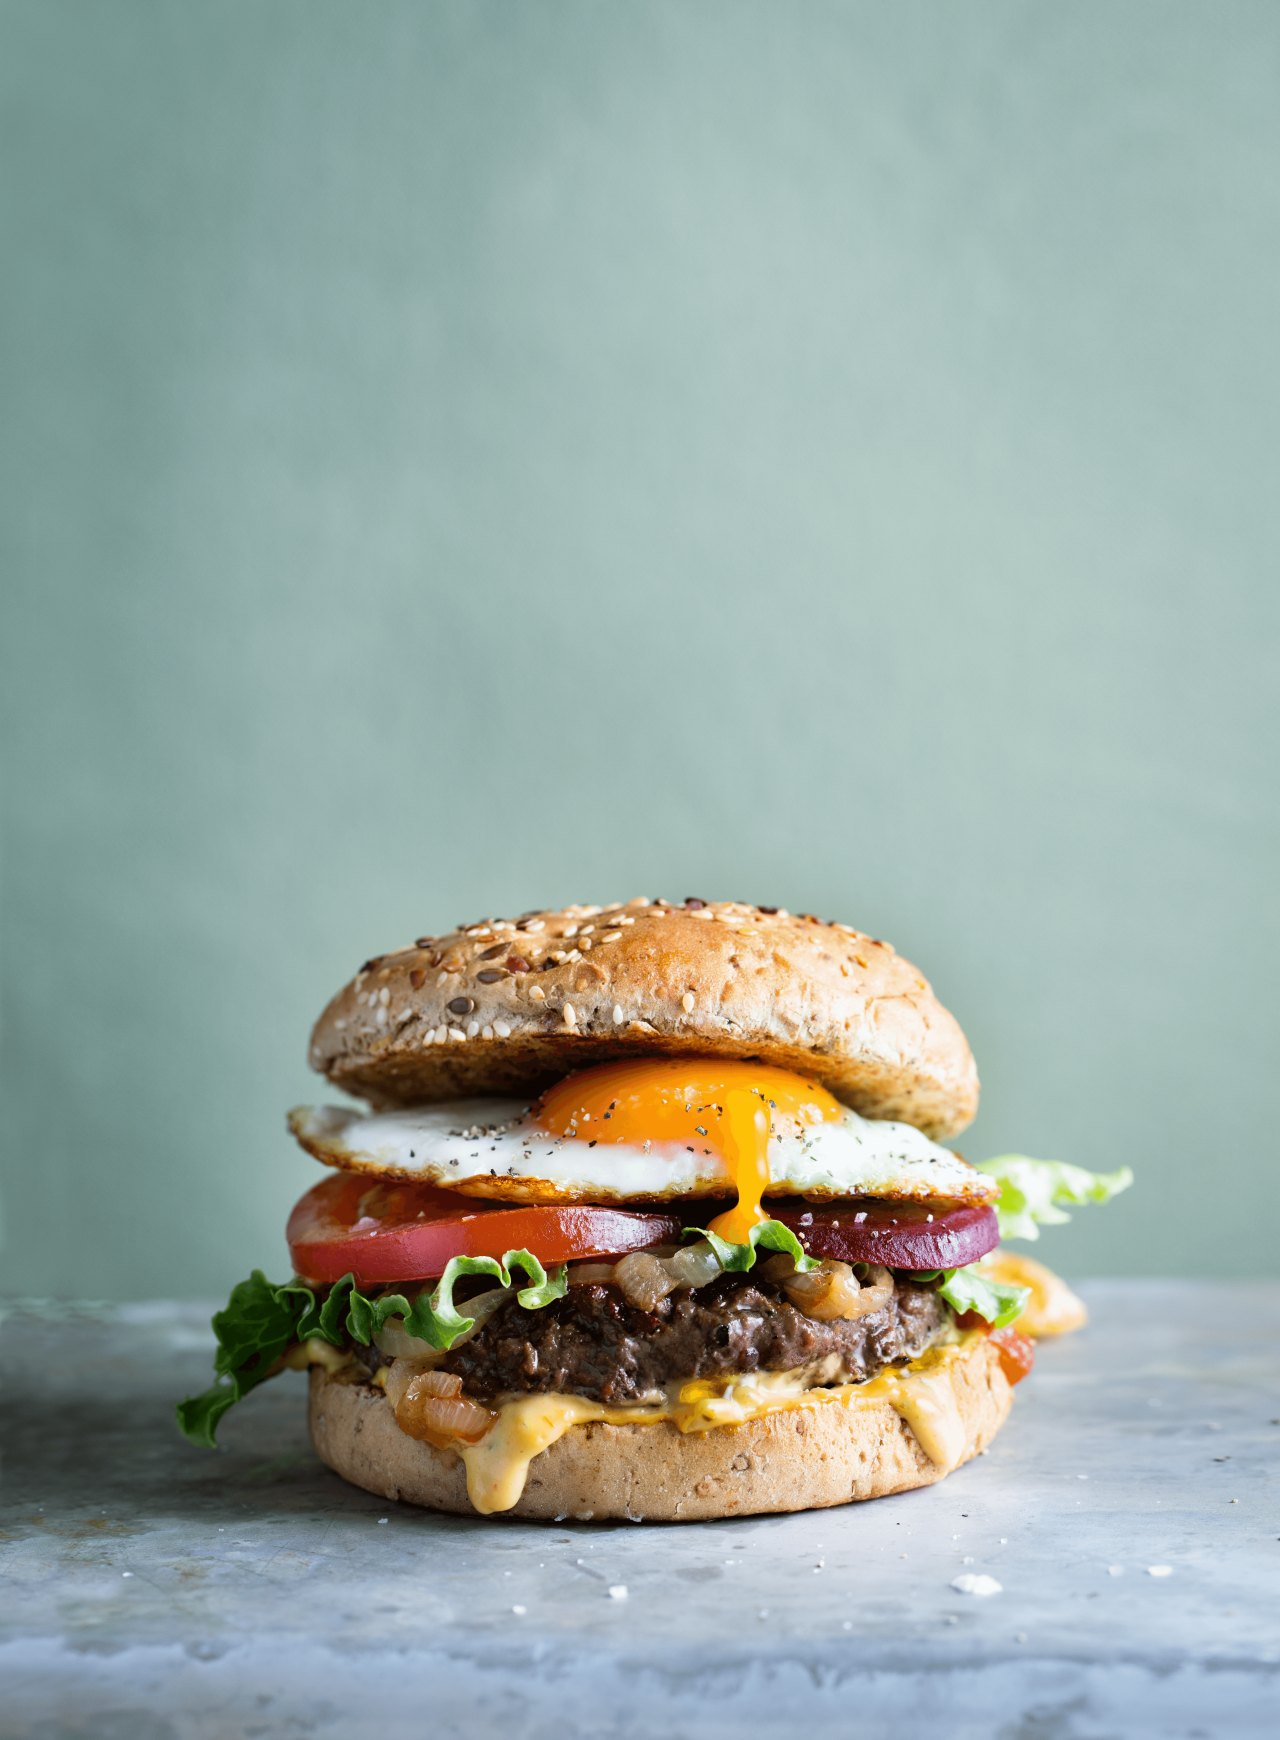 Beef burger with egg, tomato and lettuce sits on a counter.